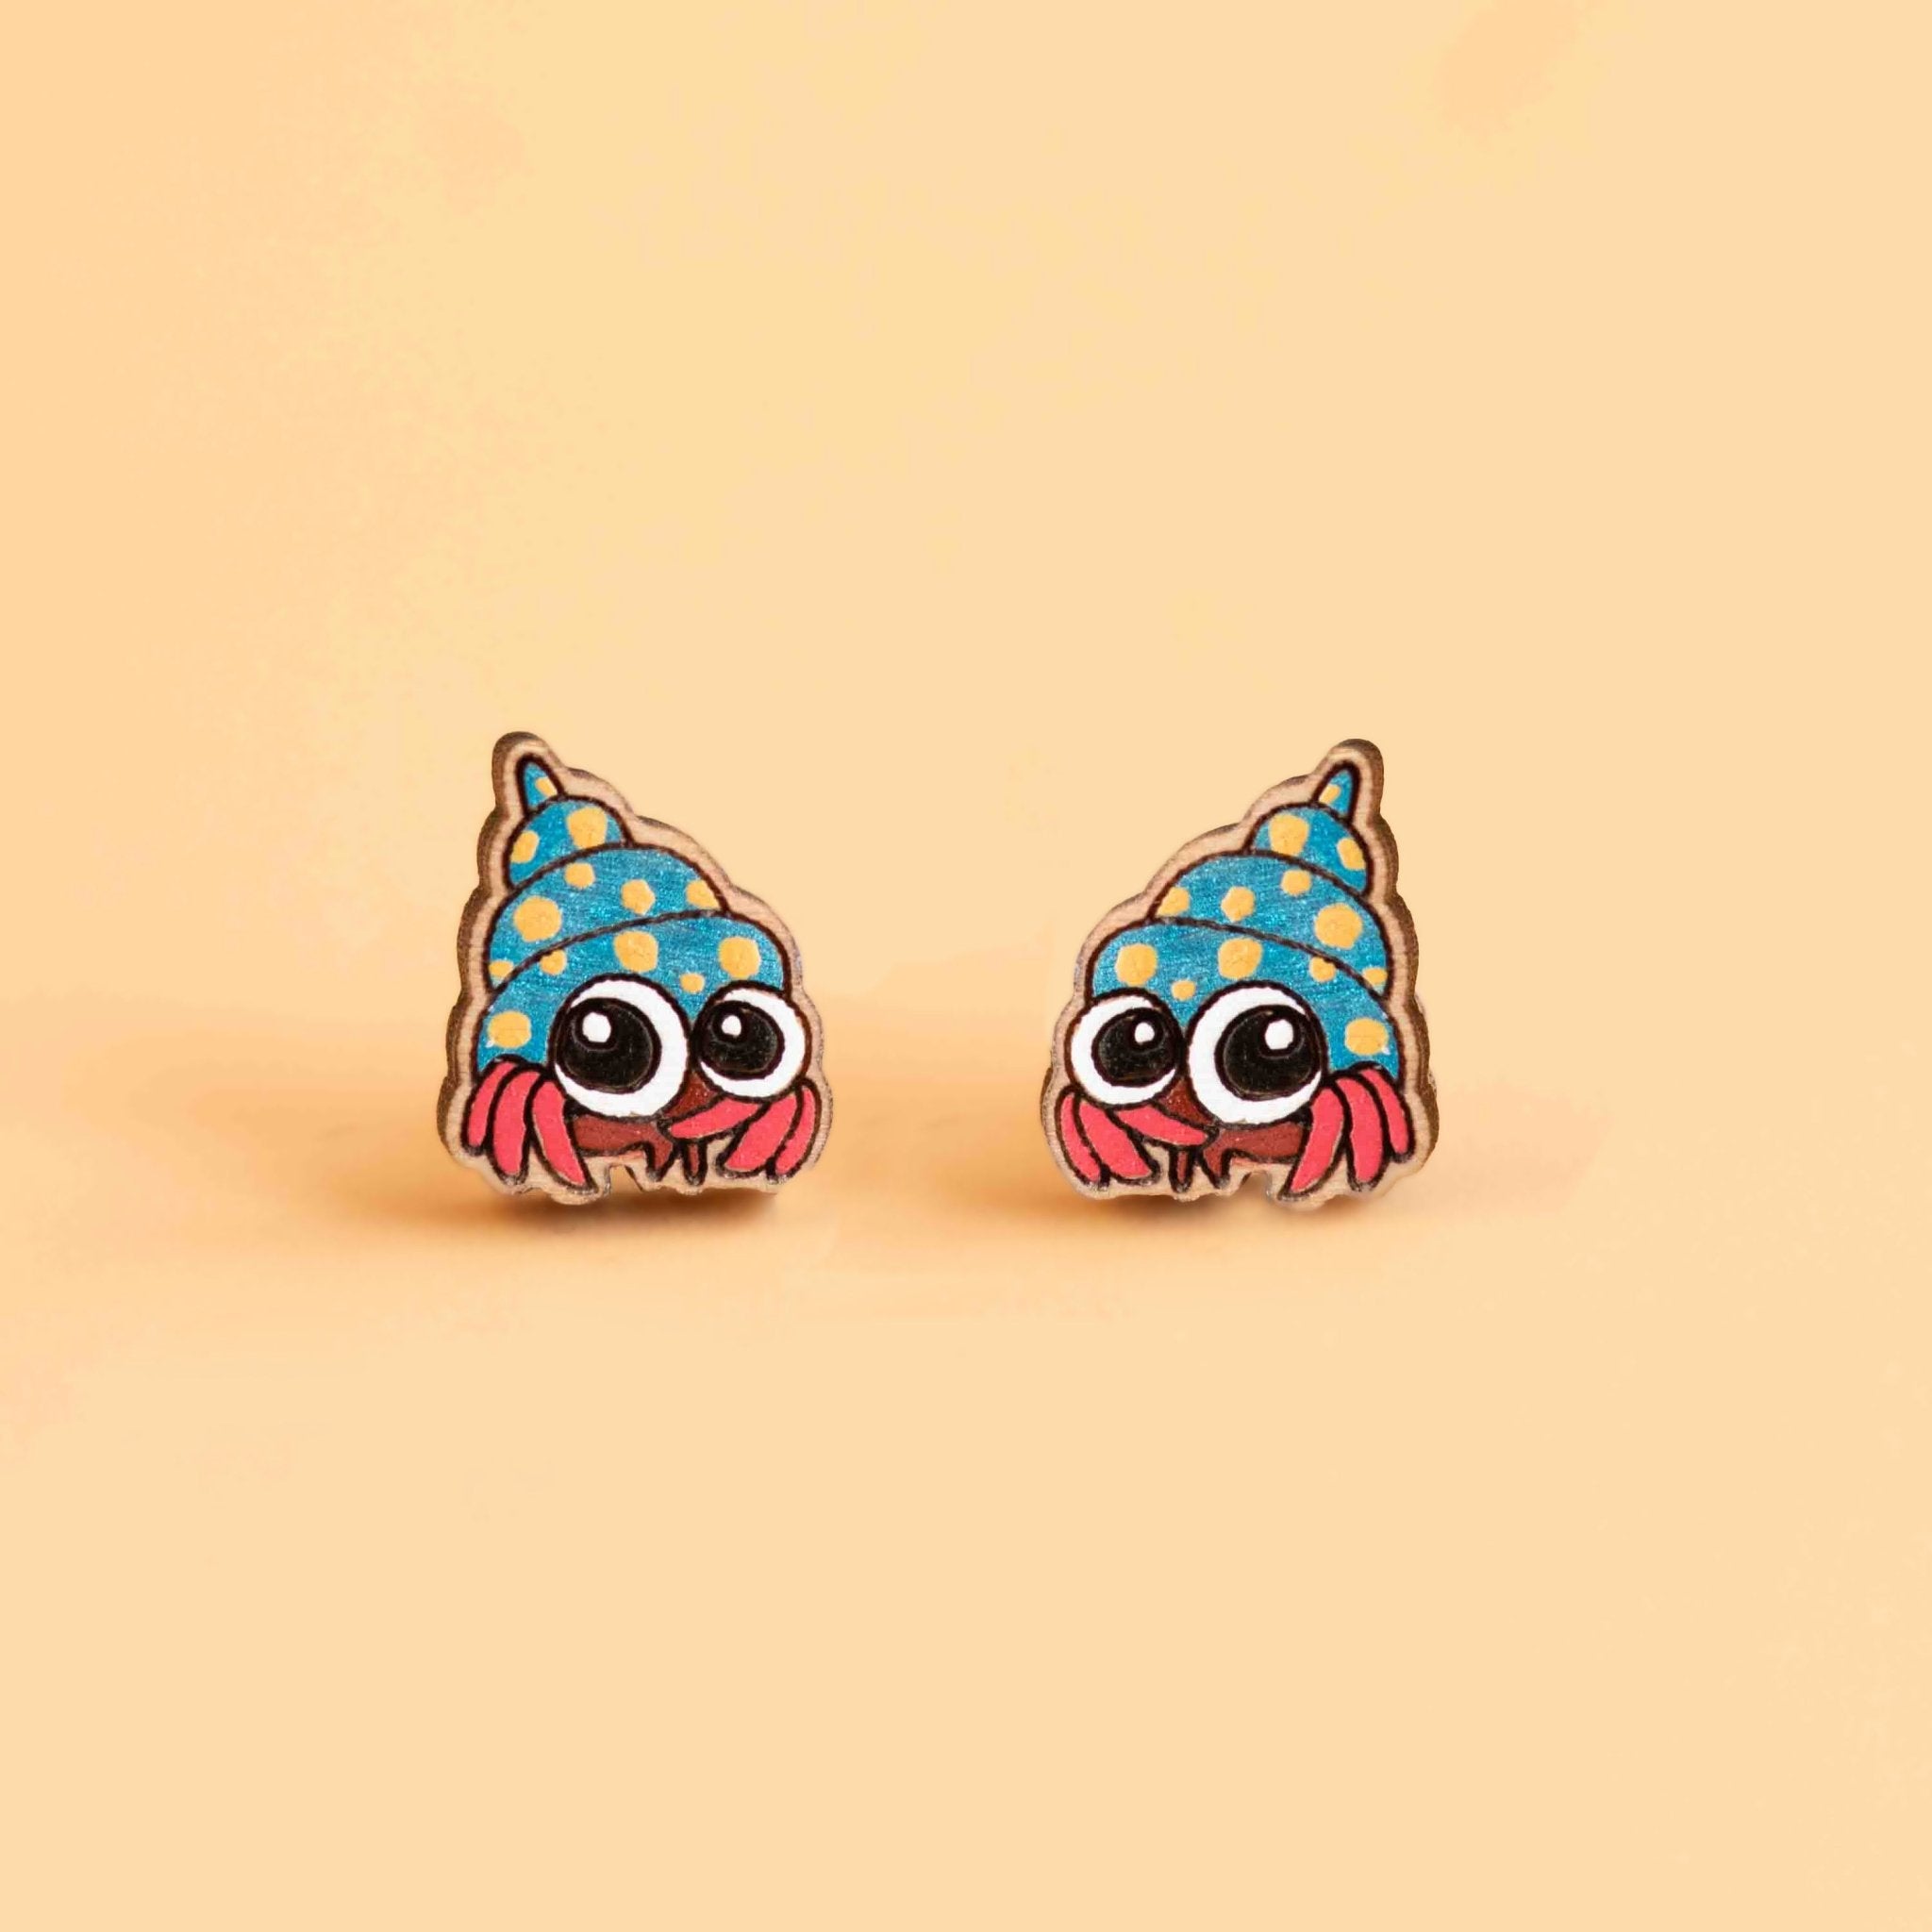 Hand-painted Hermit Crab Cherry Wood Stud Earrings - PES13044 - Robin Valley Official Store